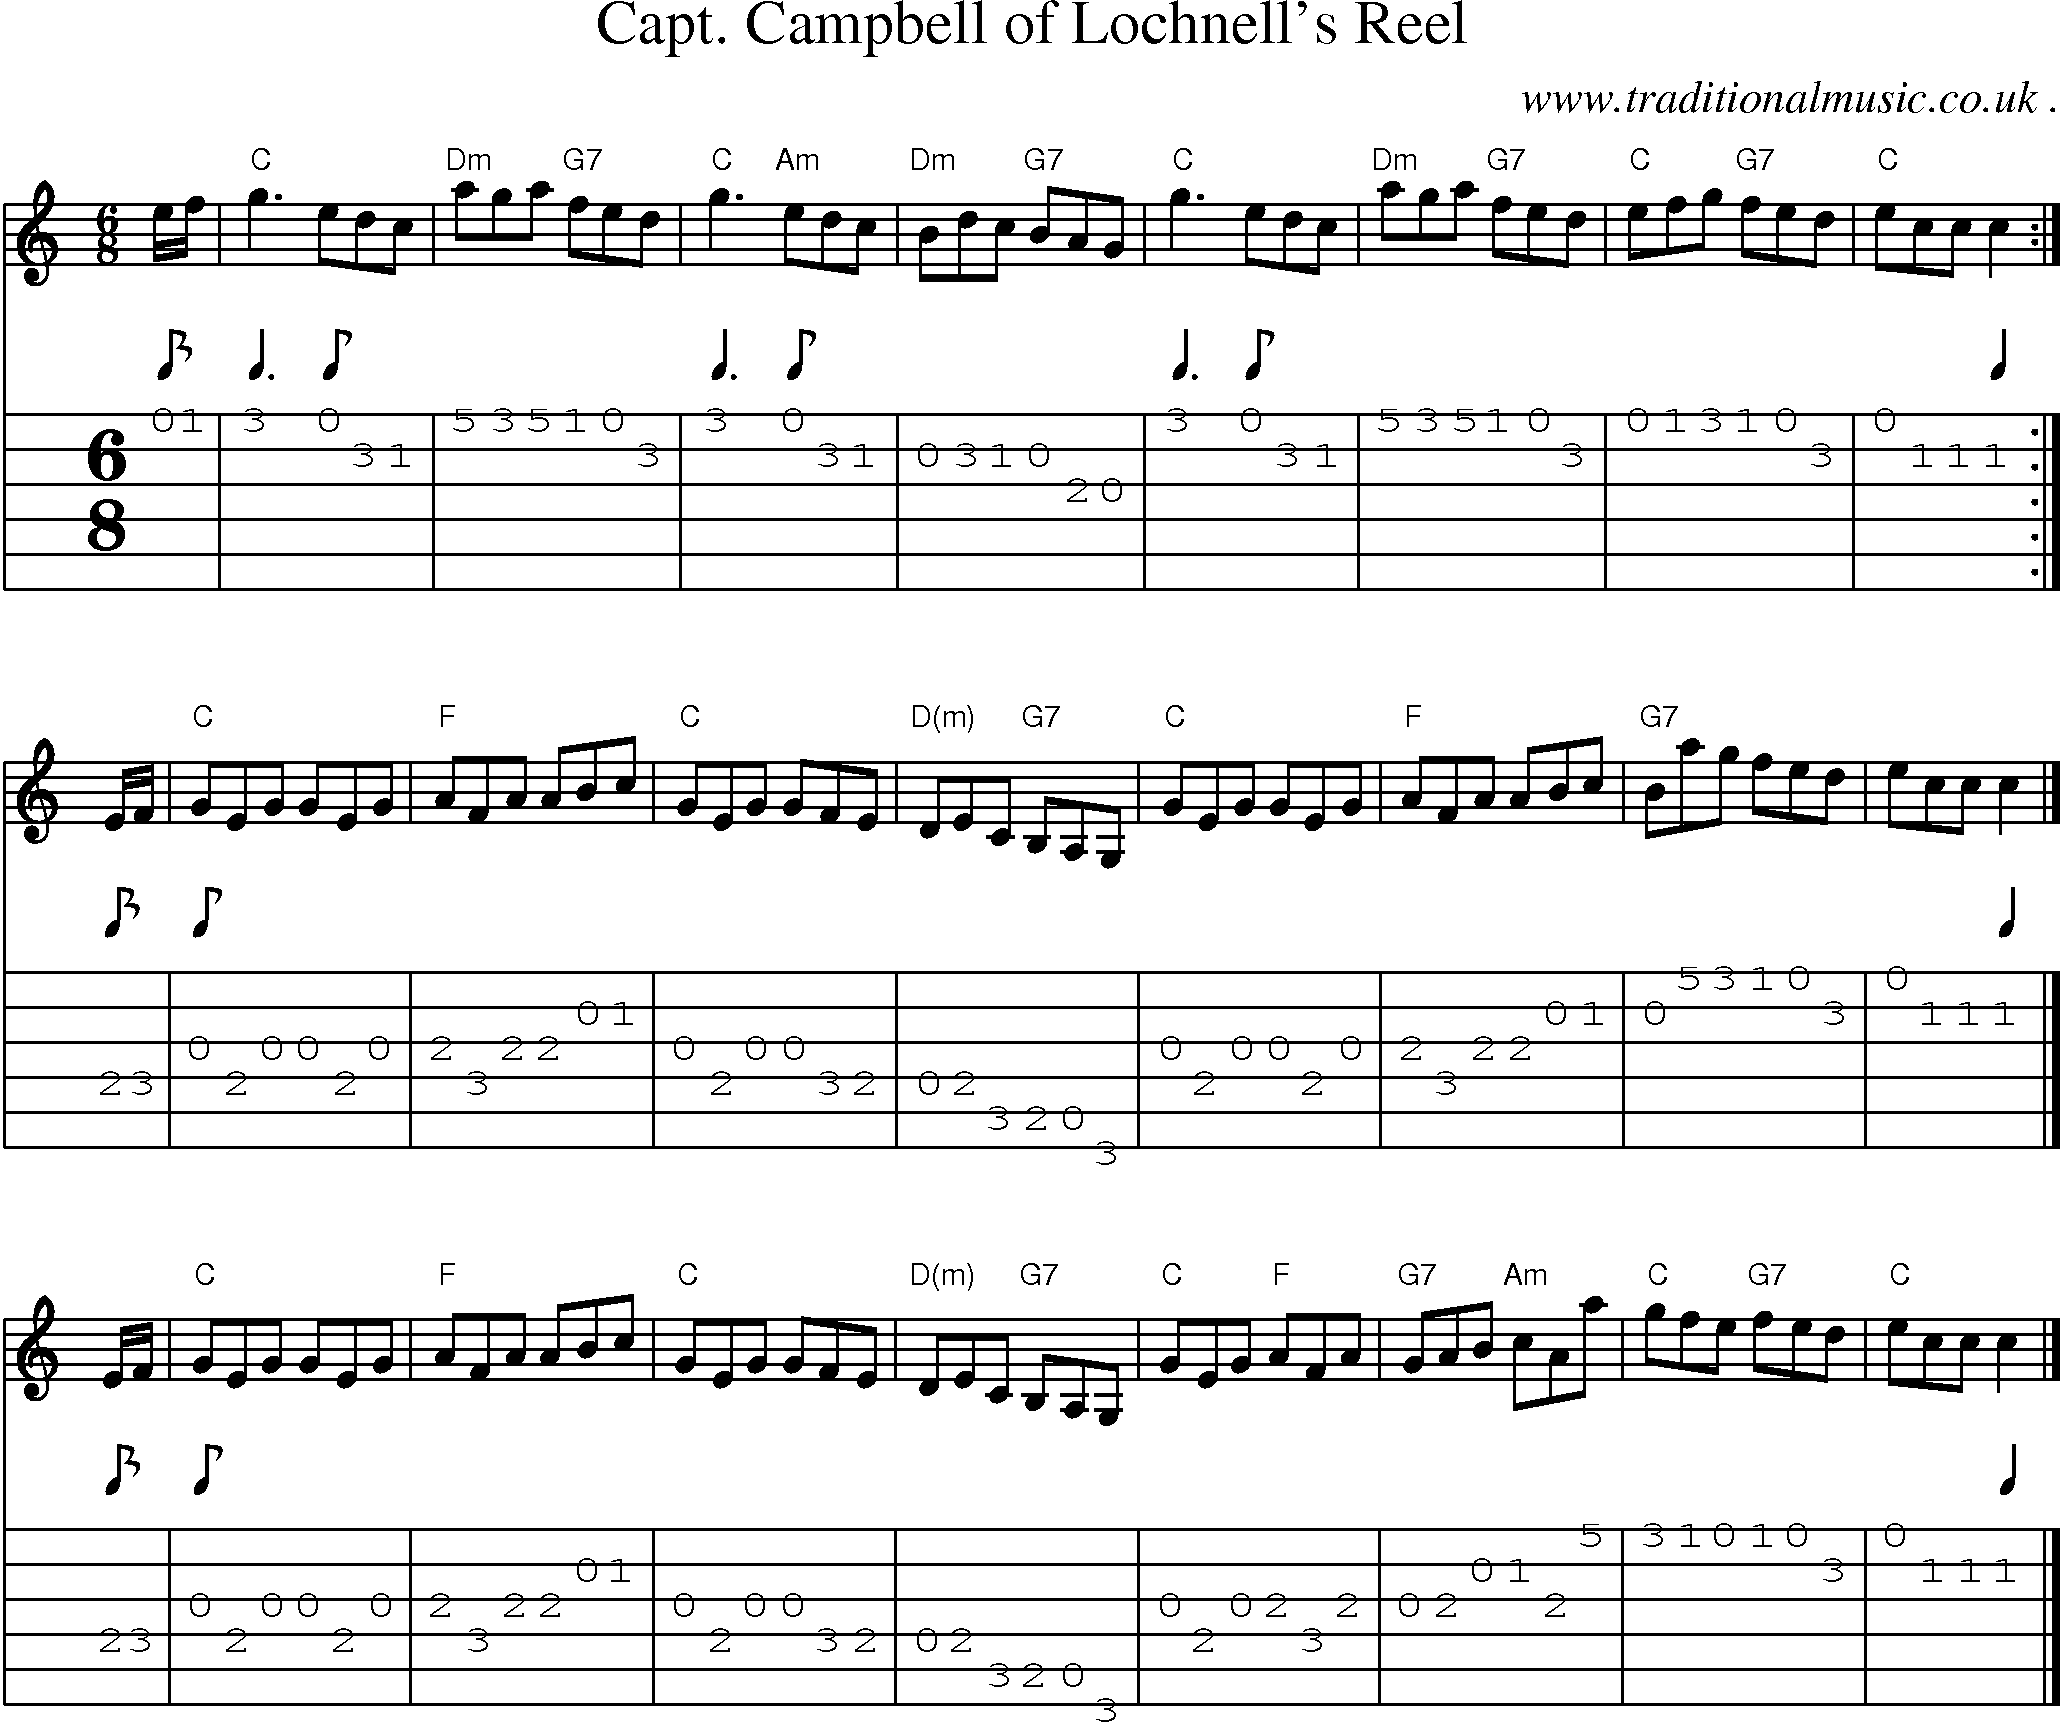 Sheet-music  score, Chords and Guitar Tabs for Capt Campbell Of Lochnells Reel